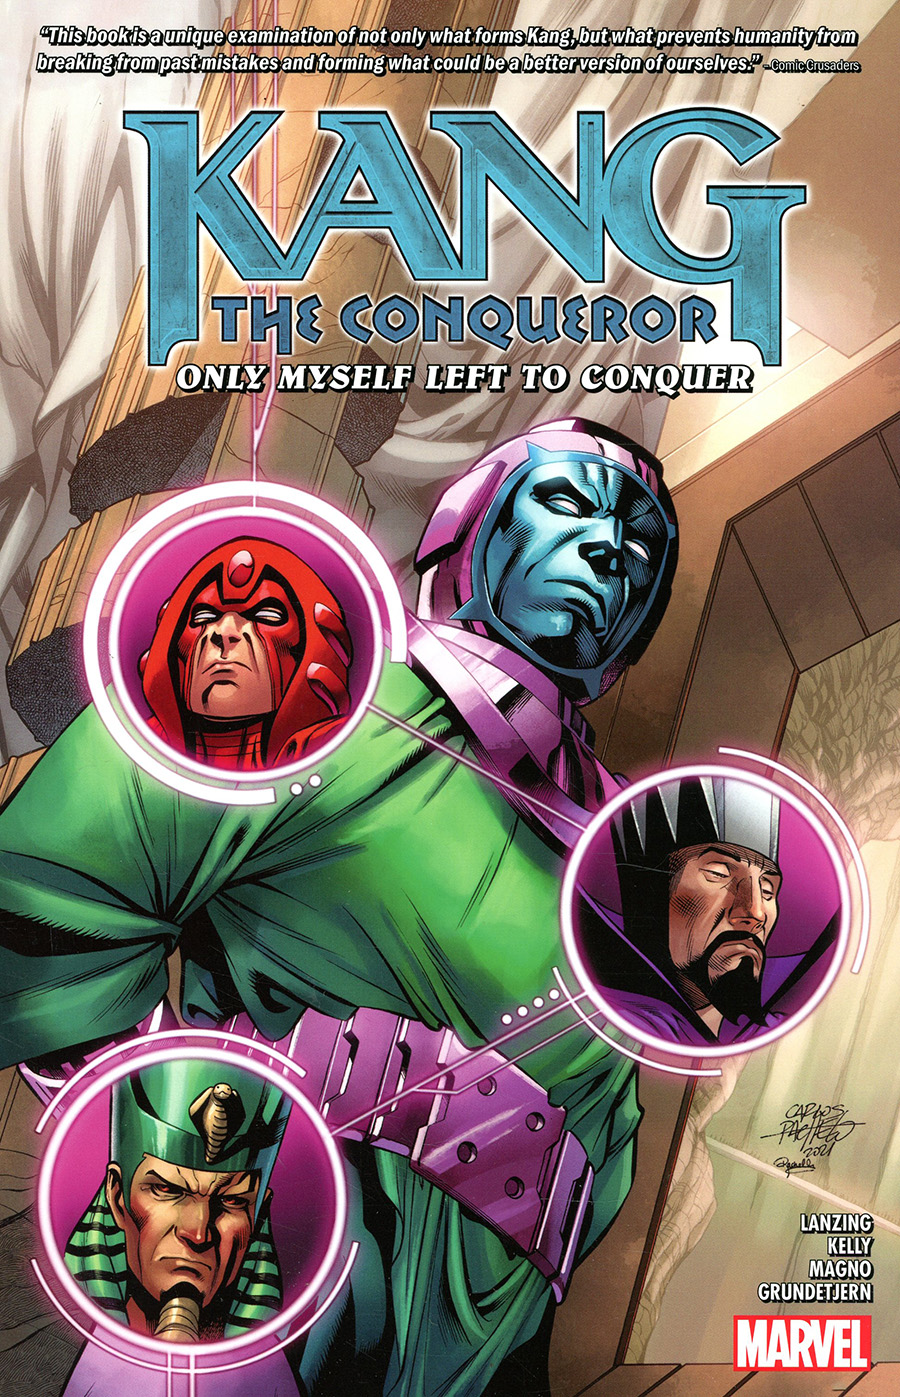 Kang The Conqueror Only Myself Left To Conquer TP